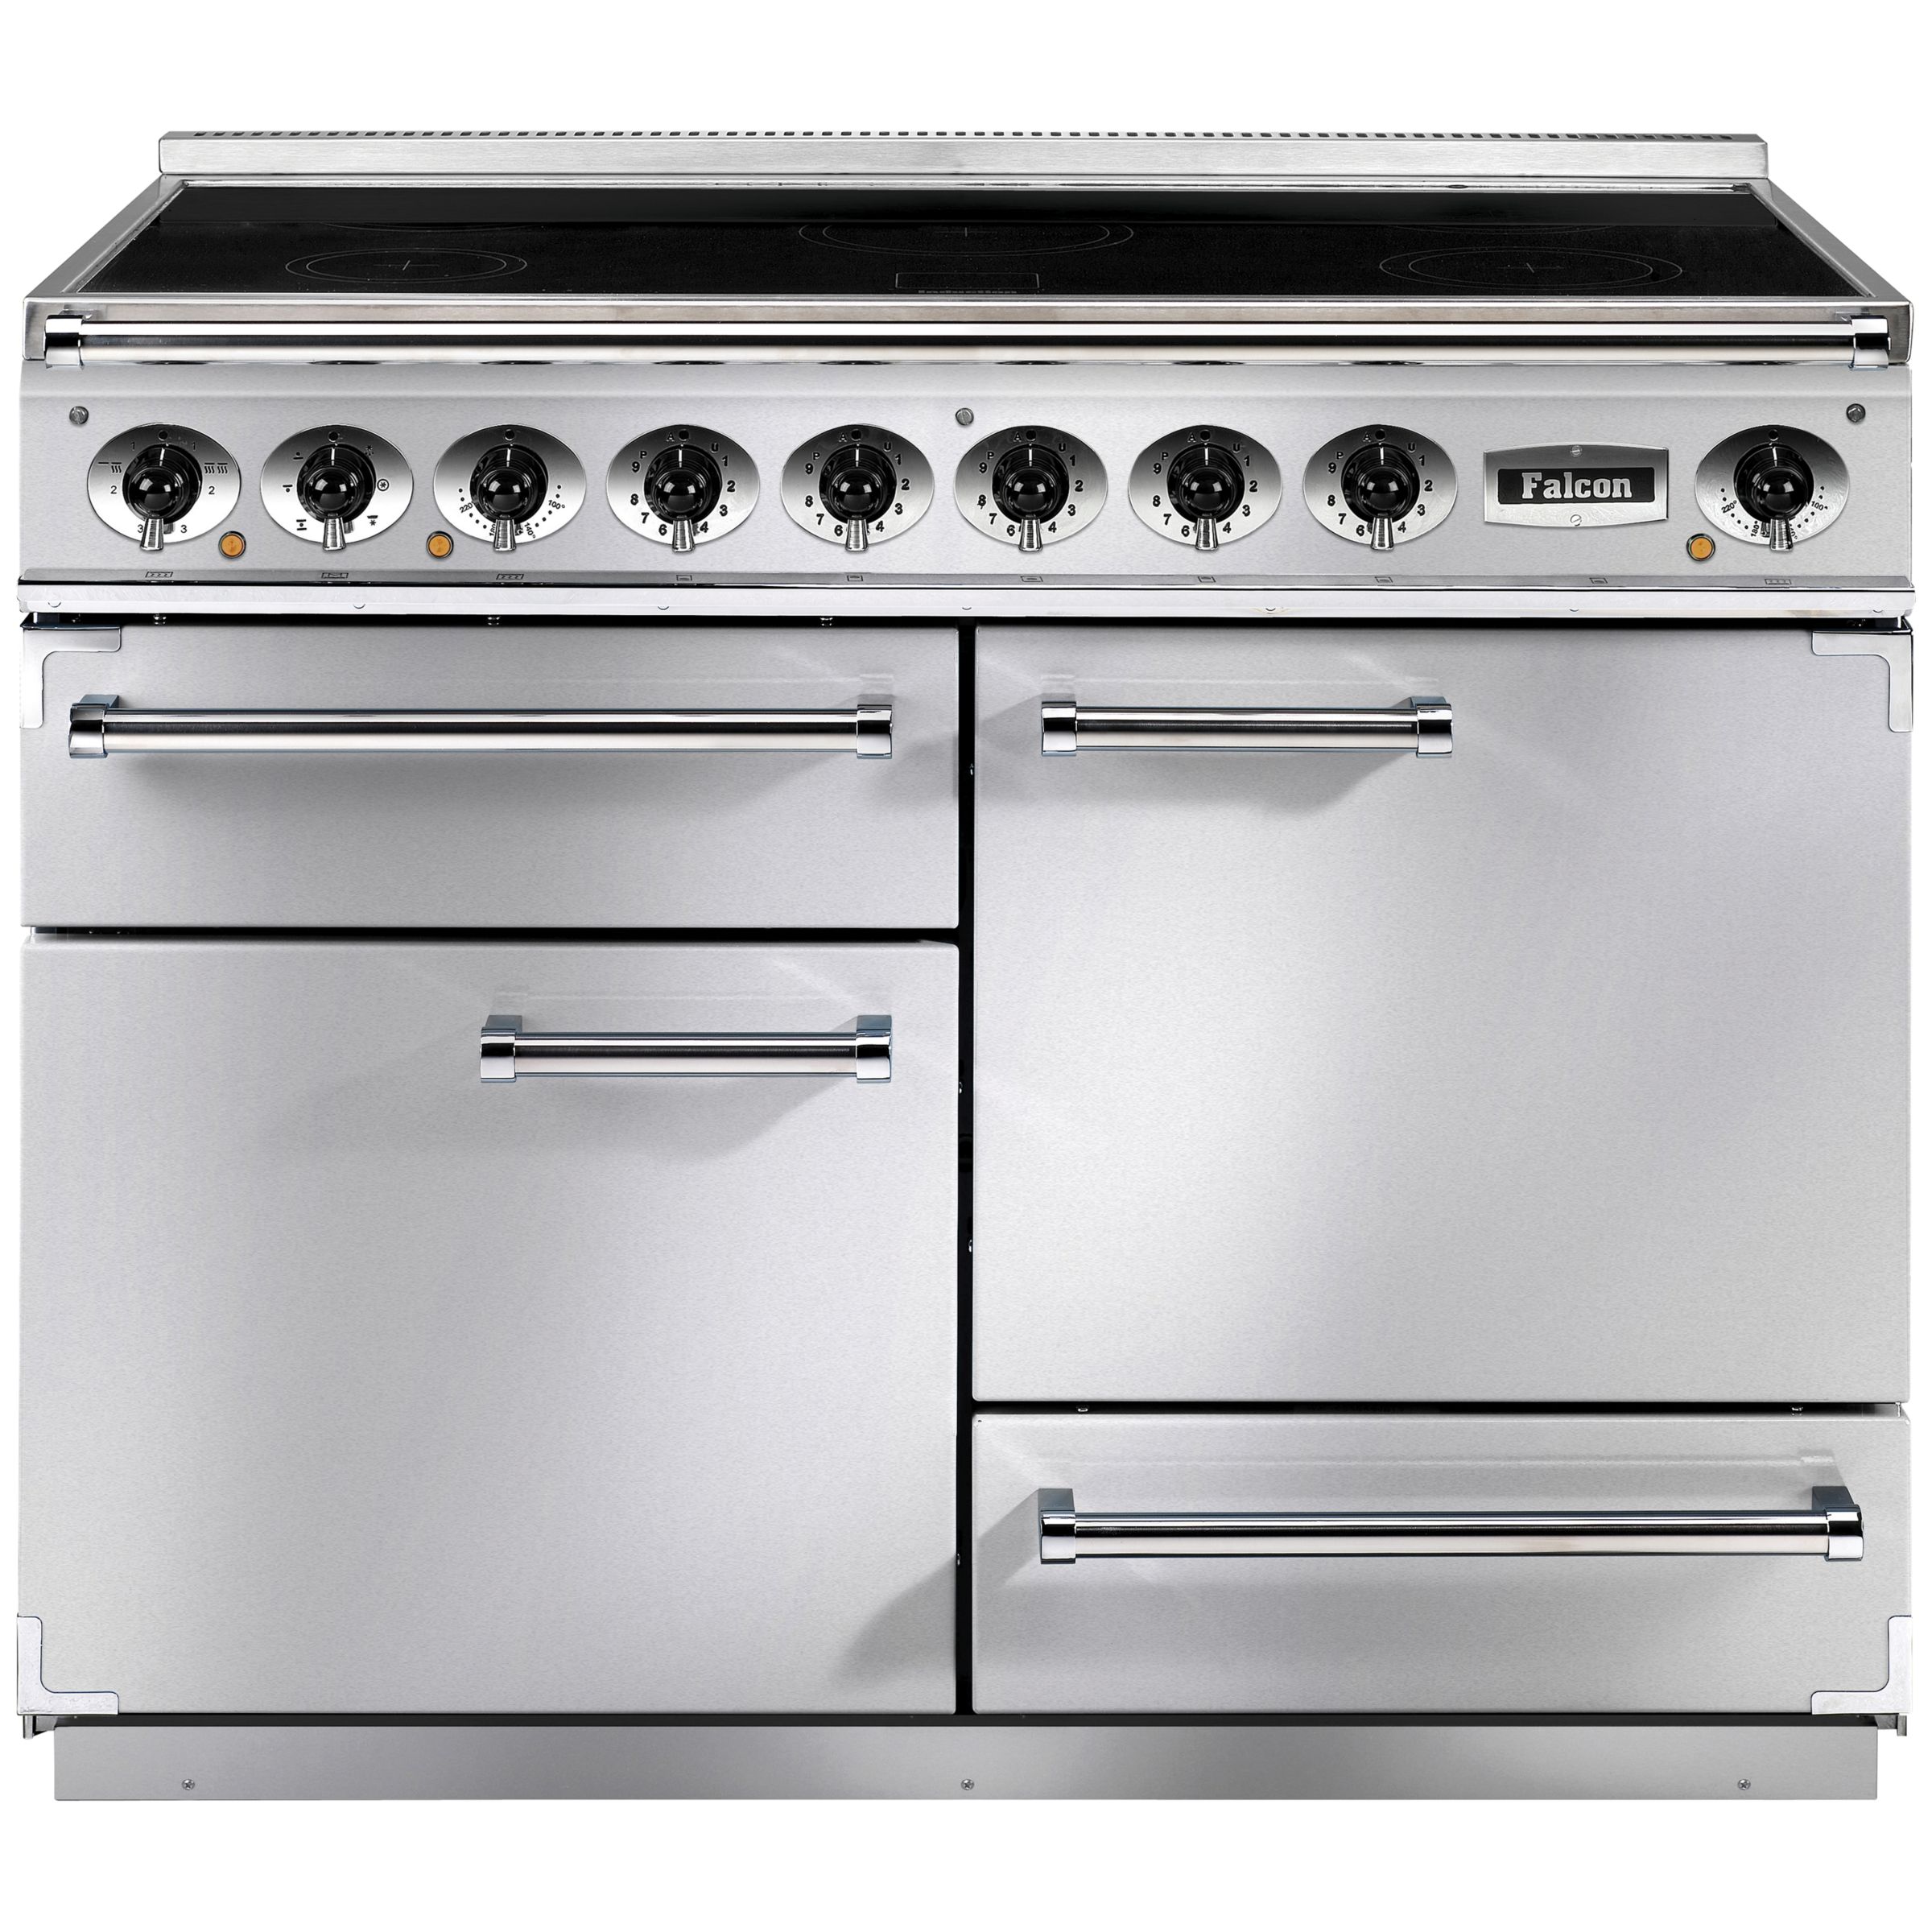 Falcon 1092 Deluxe Induction Hob Range Cooker, Stainless Steel